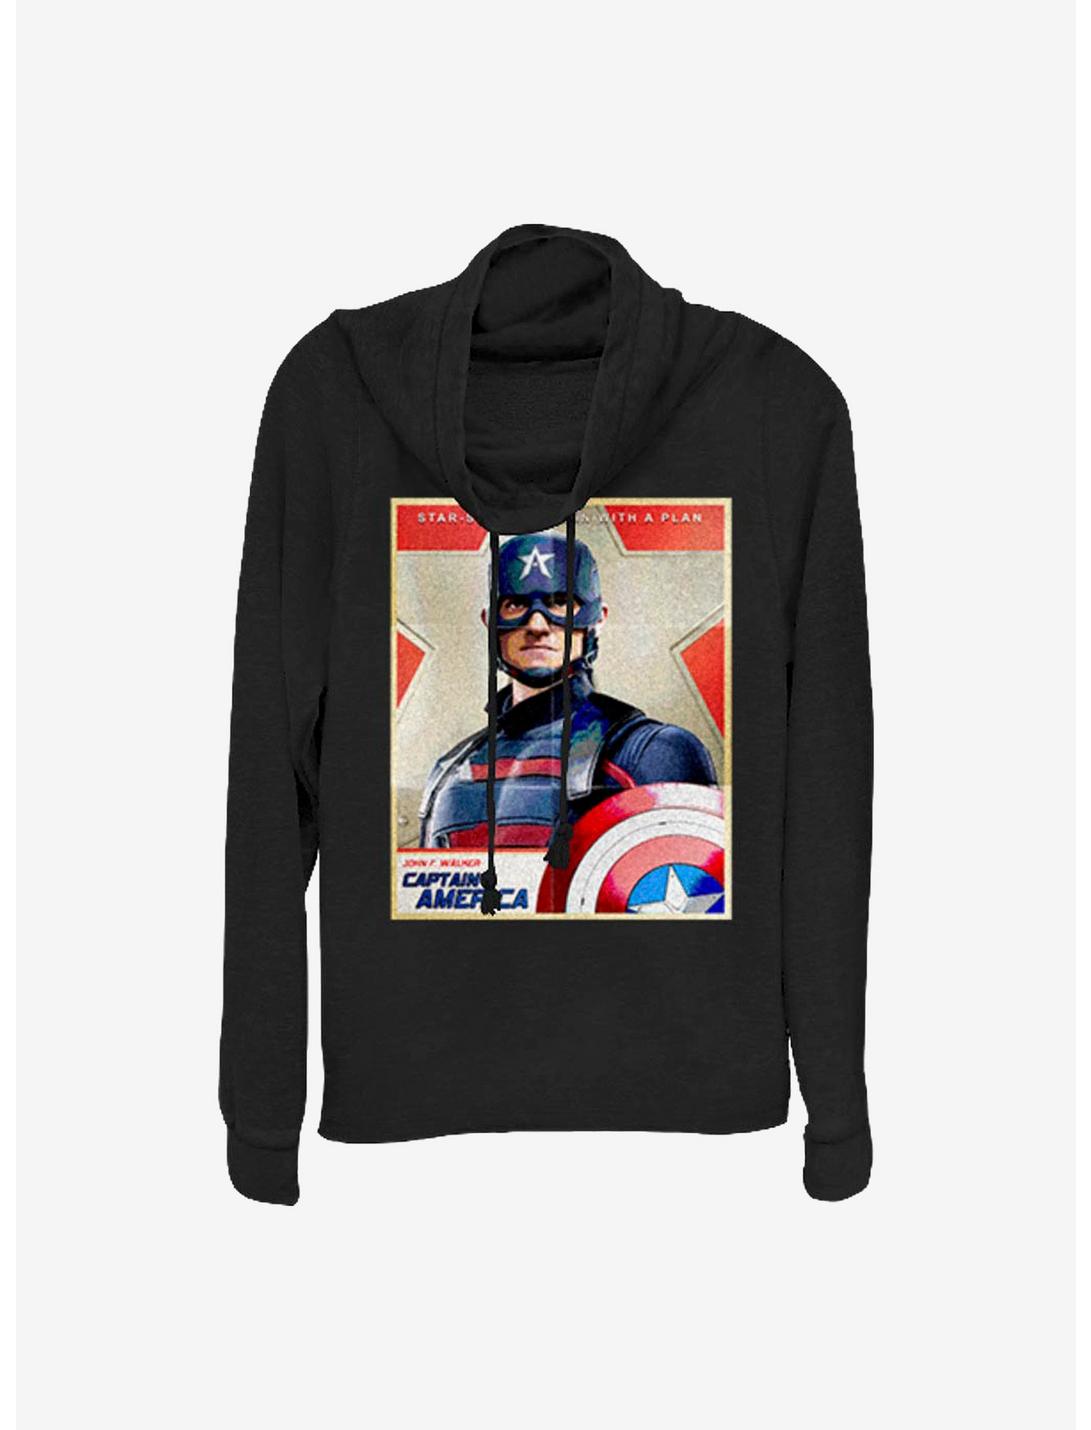 Marvel The Falcon And The Winter Soldier Inspired By Cap Cowlneck Long-Sleeve Girls Top, BLACK, hi-res